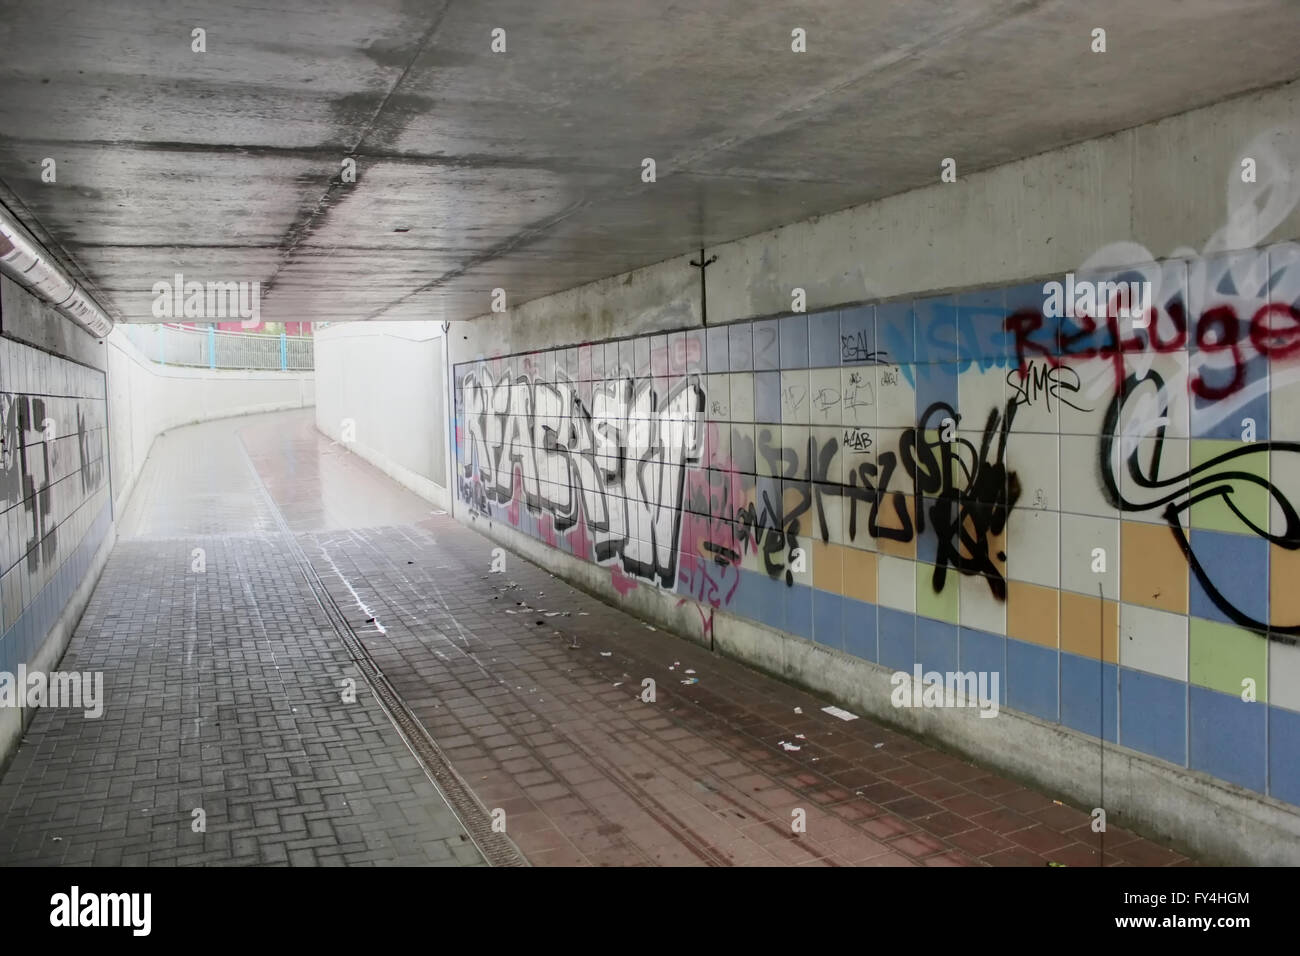 Undercrossing with graffiti and garbage under a railroad in Greifswald, Mecklenburg-Vorpommern, Germany. Image was created using Stock Photo